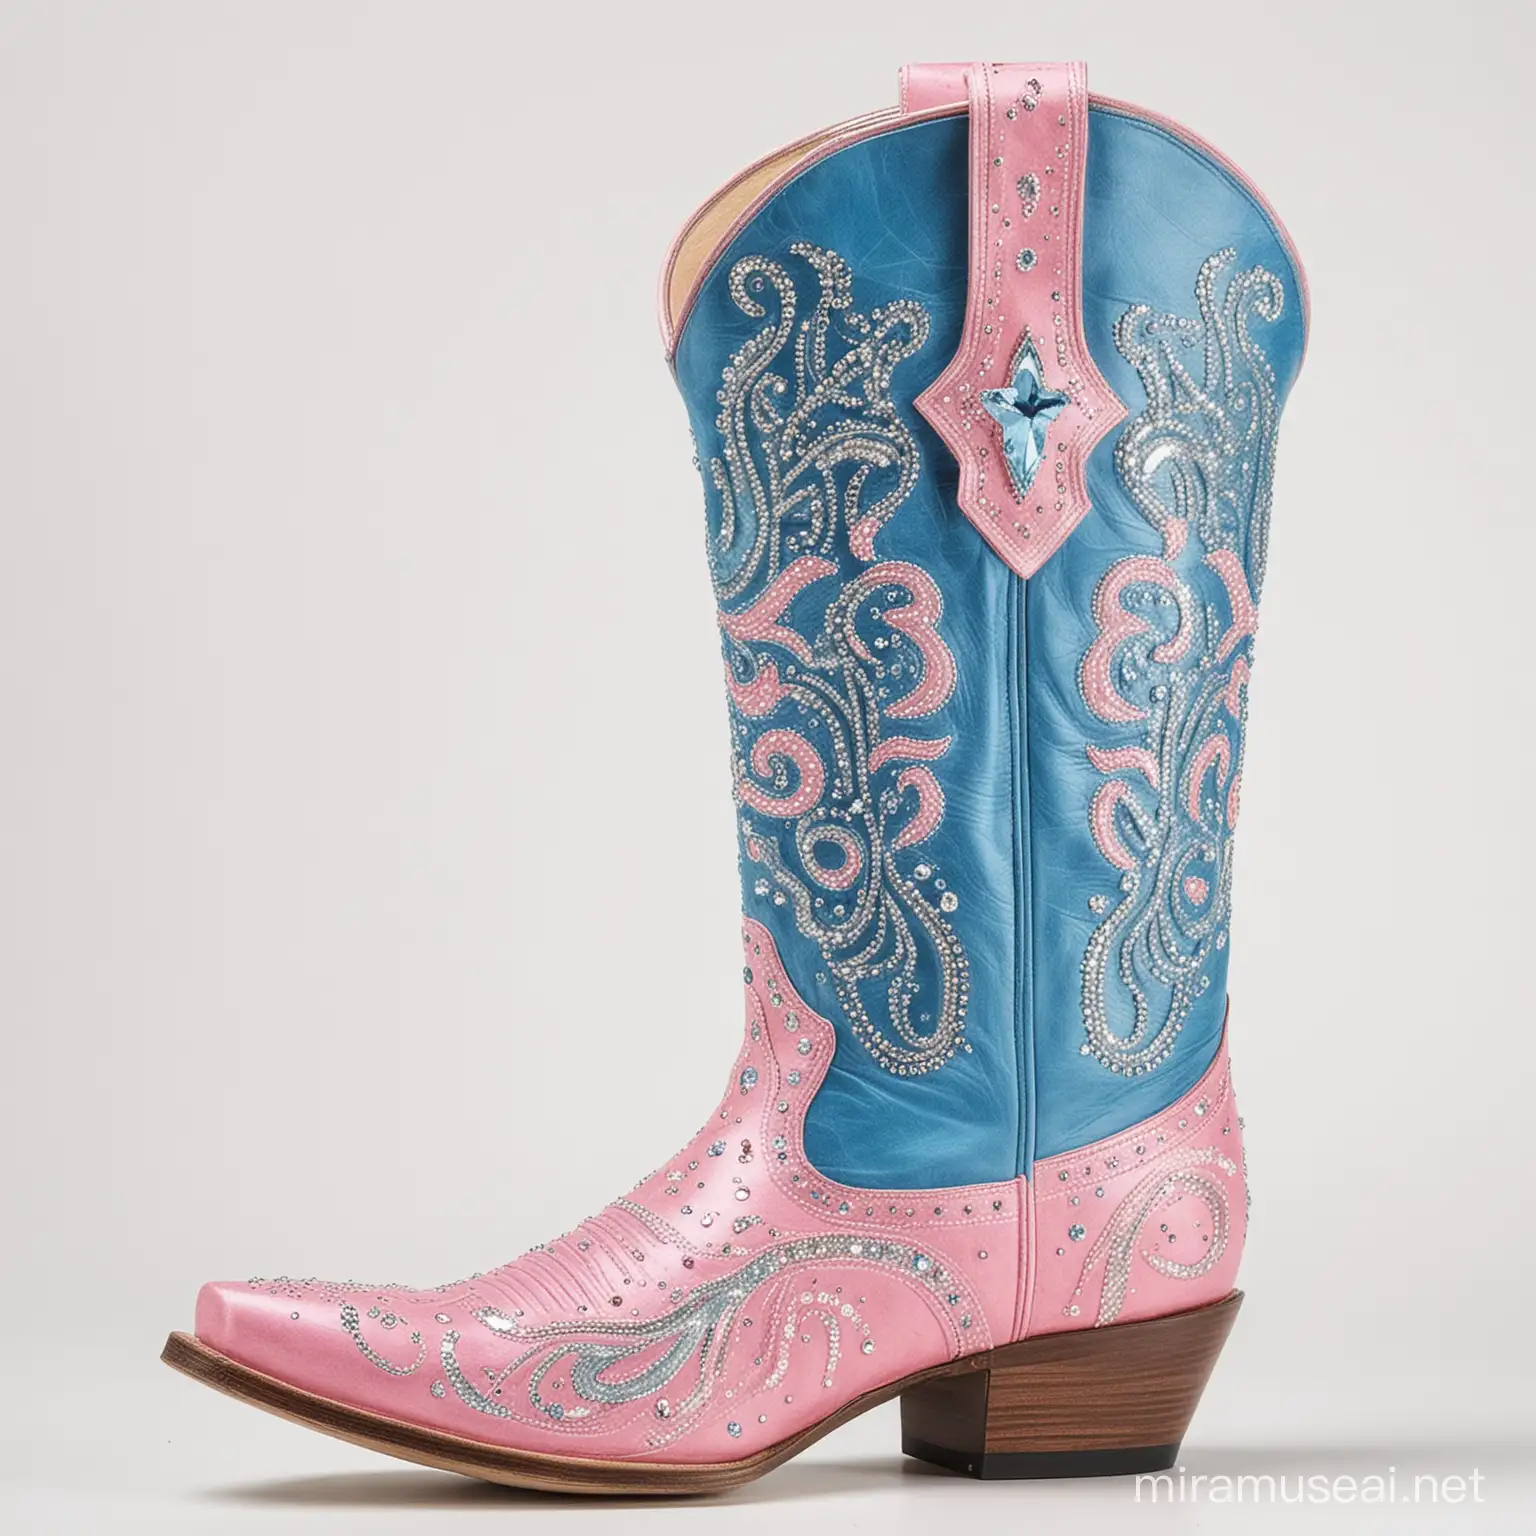 Glamorous Cowboy Boots with Bling on White